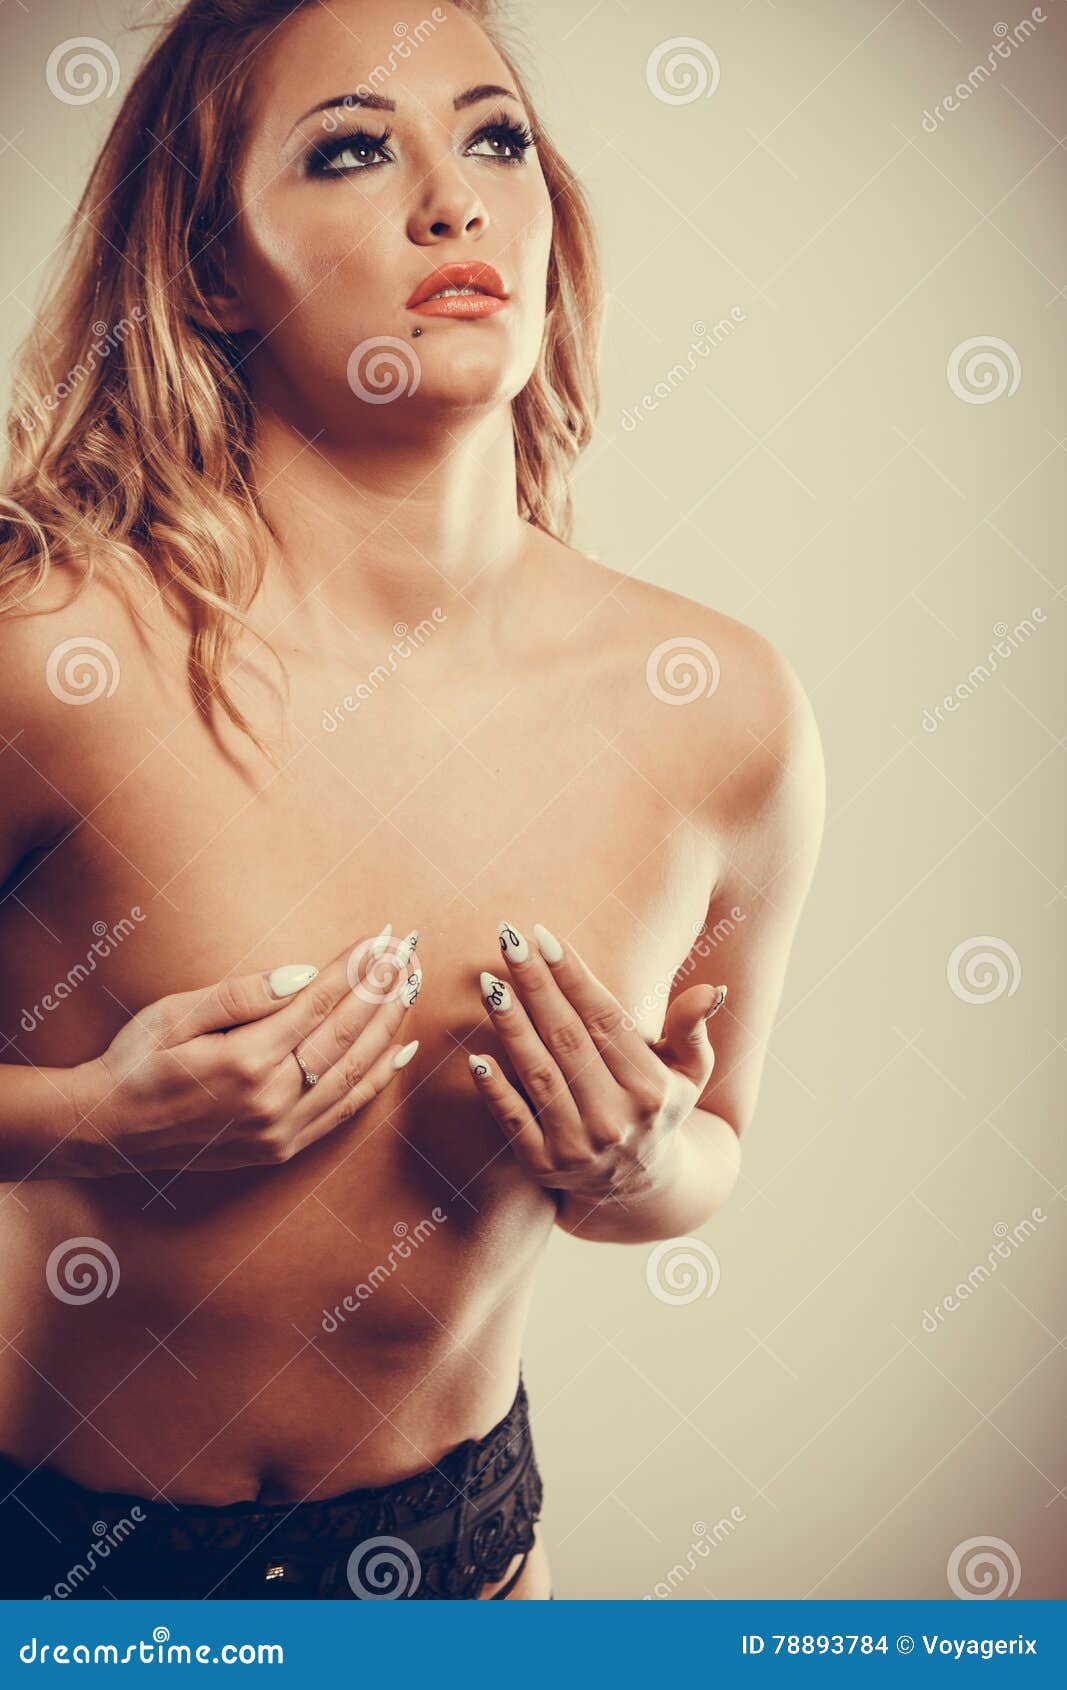 Woman Holding Touching Her Breast